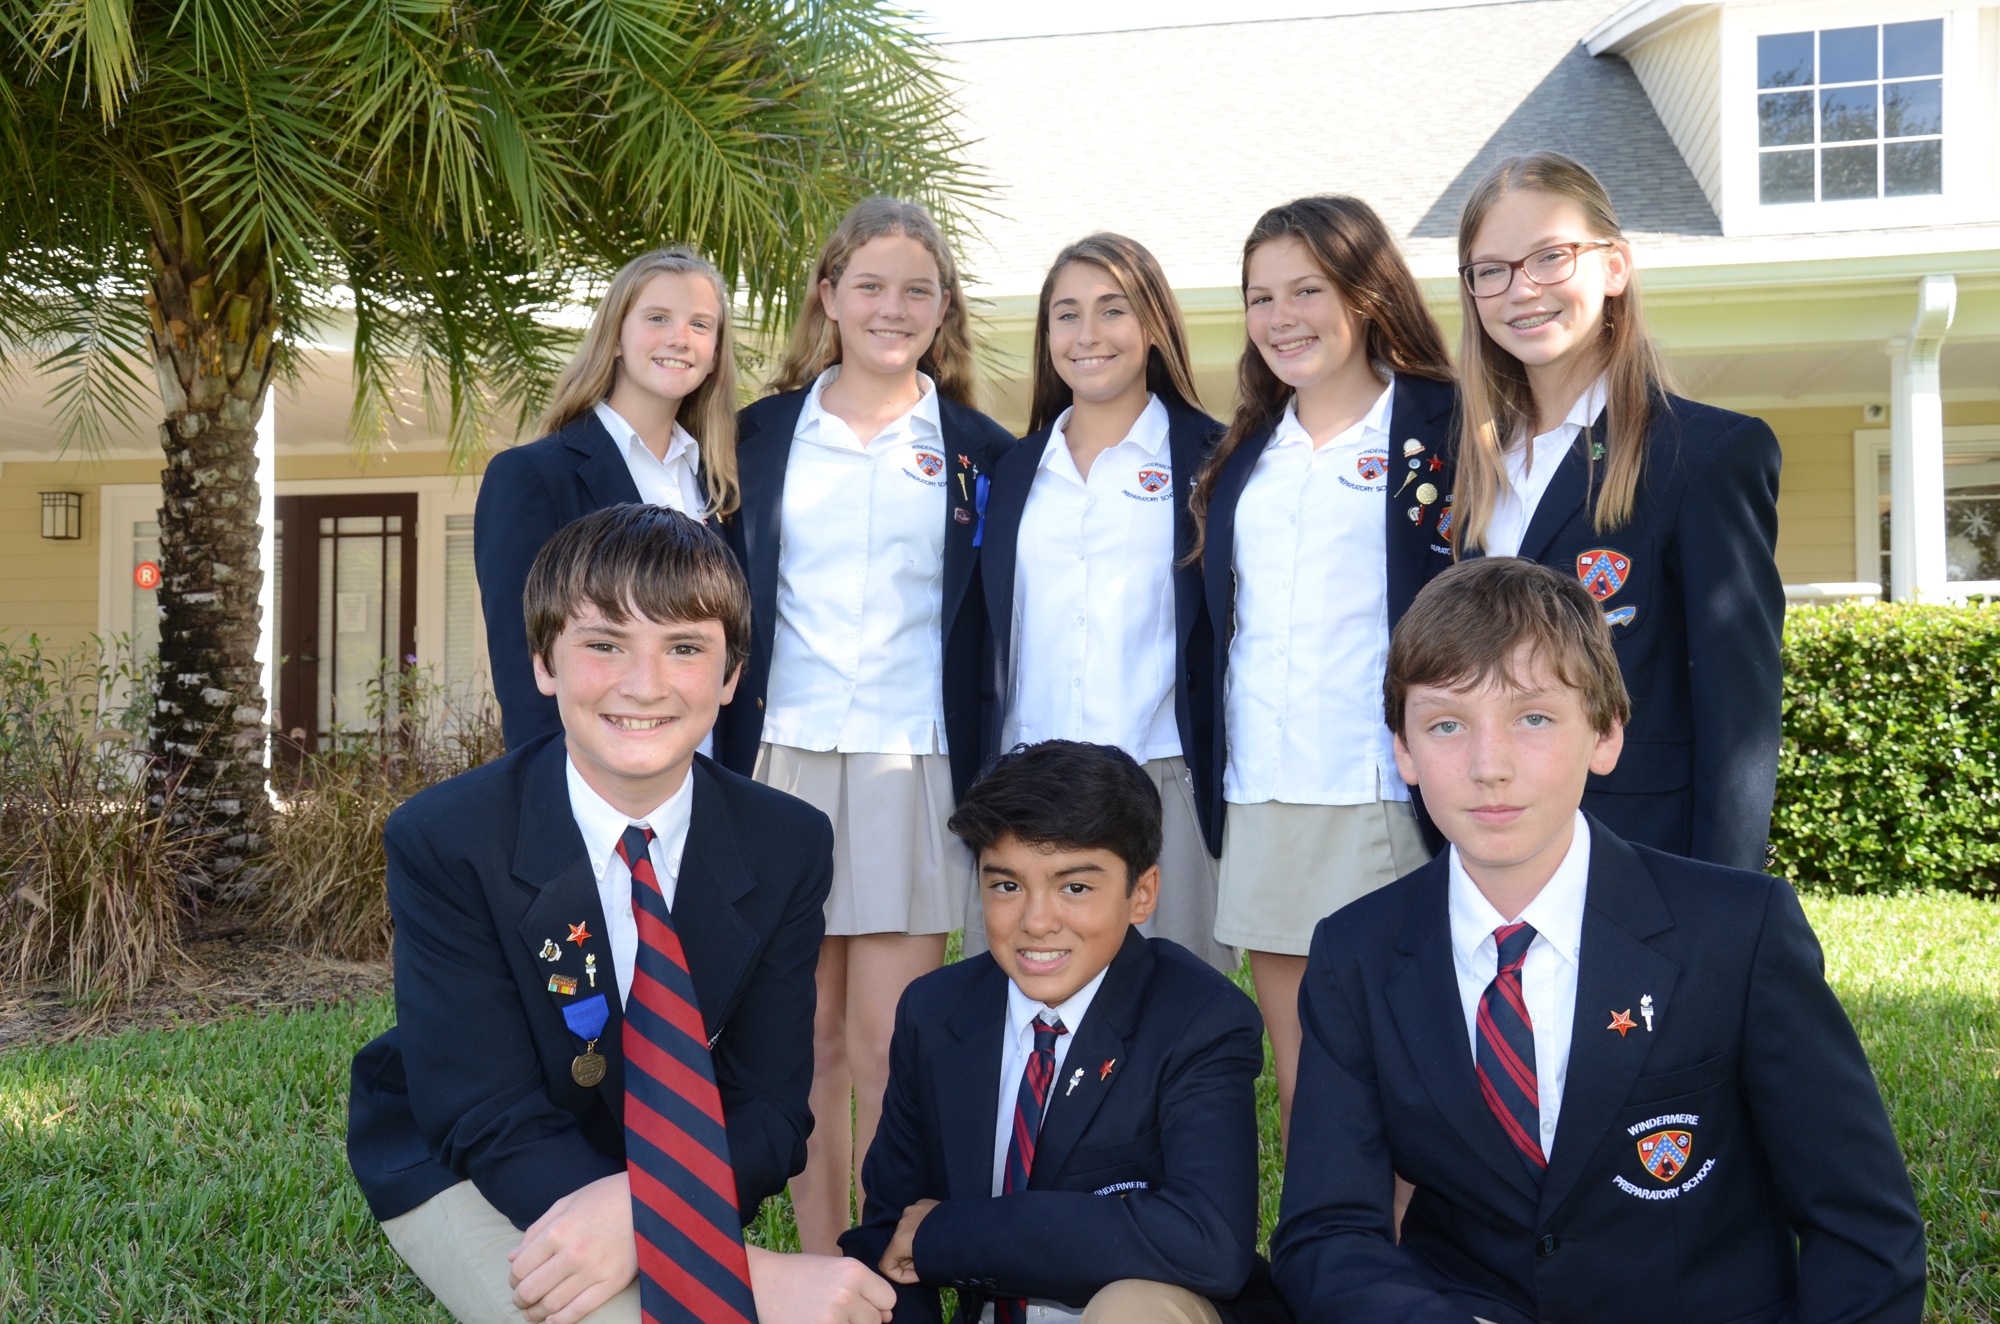 These seventh graders are among the founding members of the 2021 club.